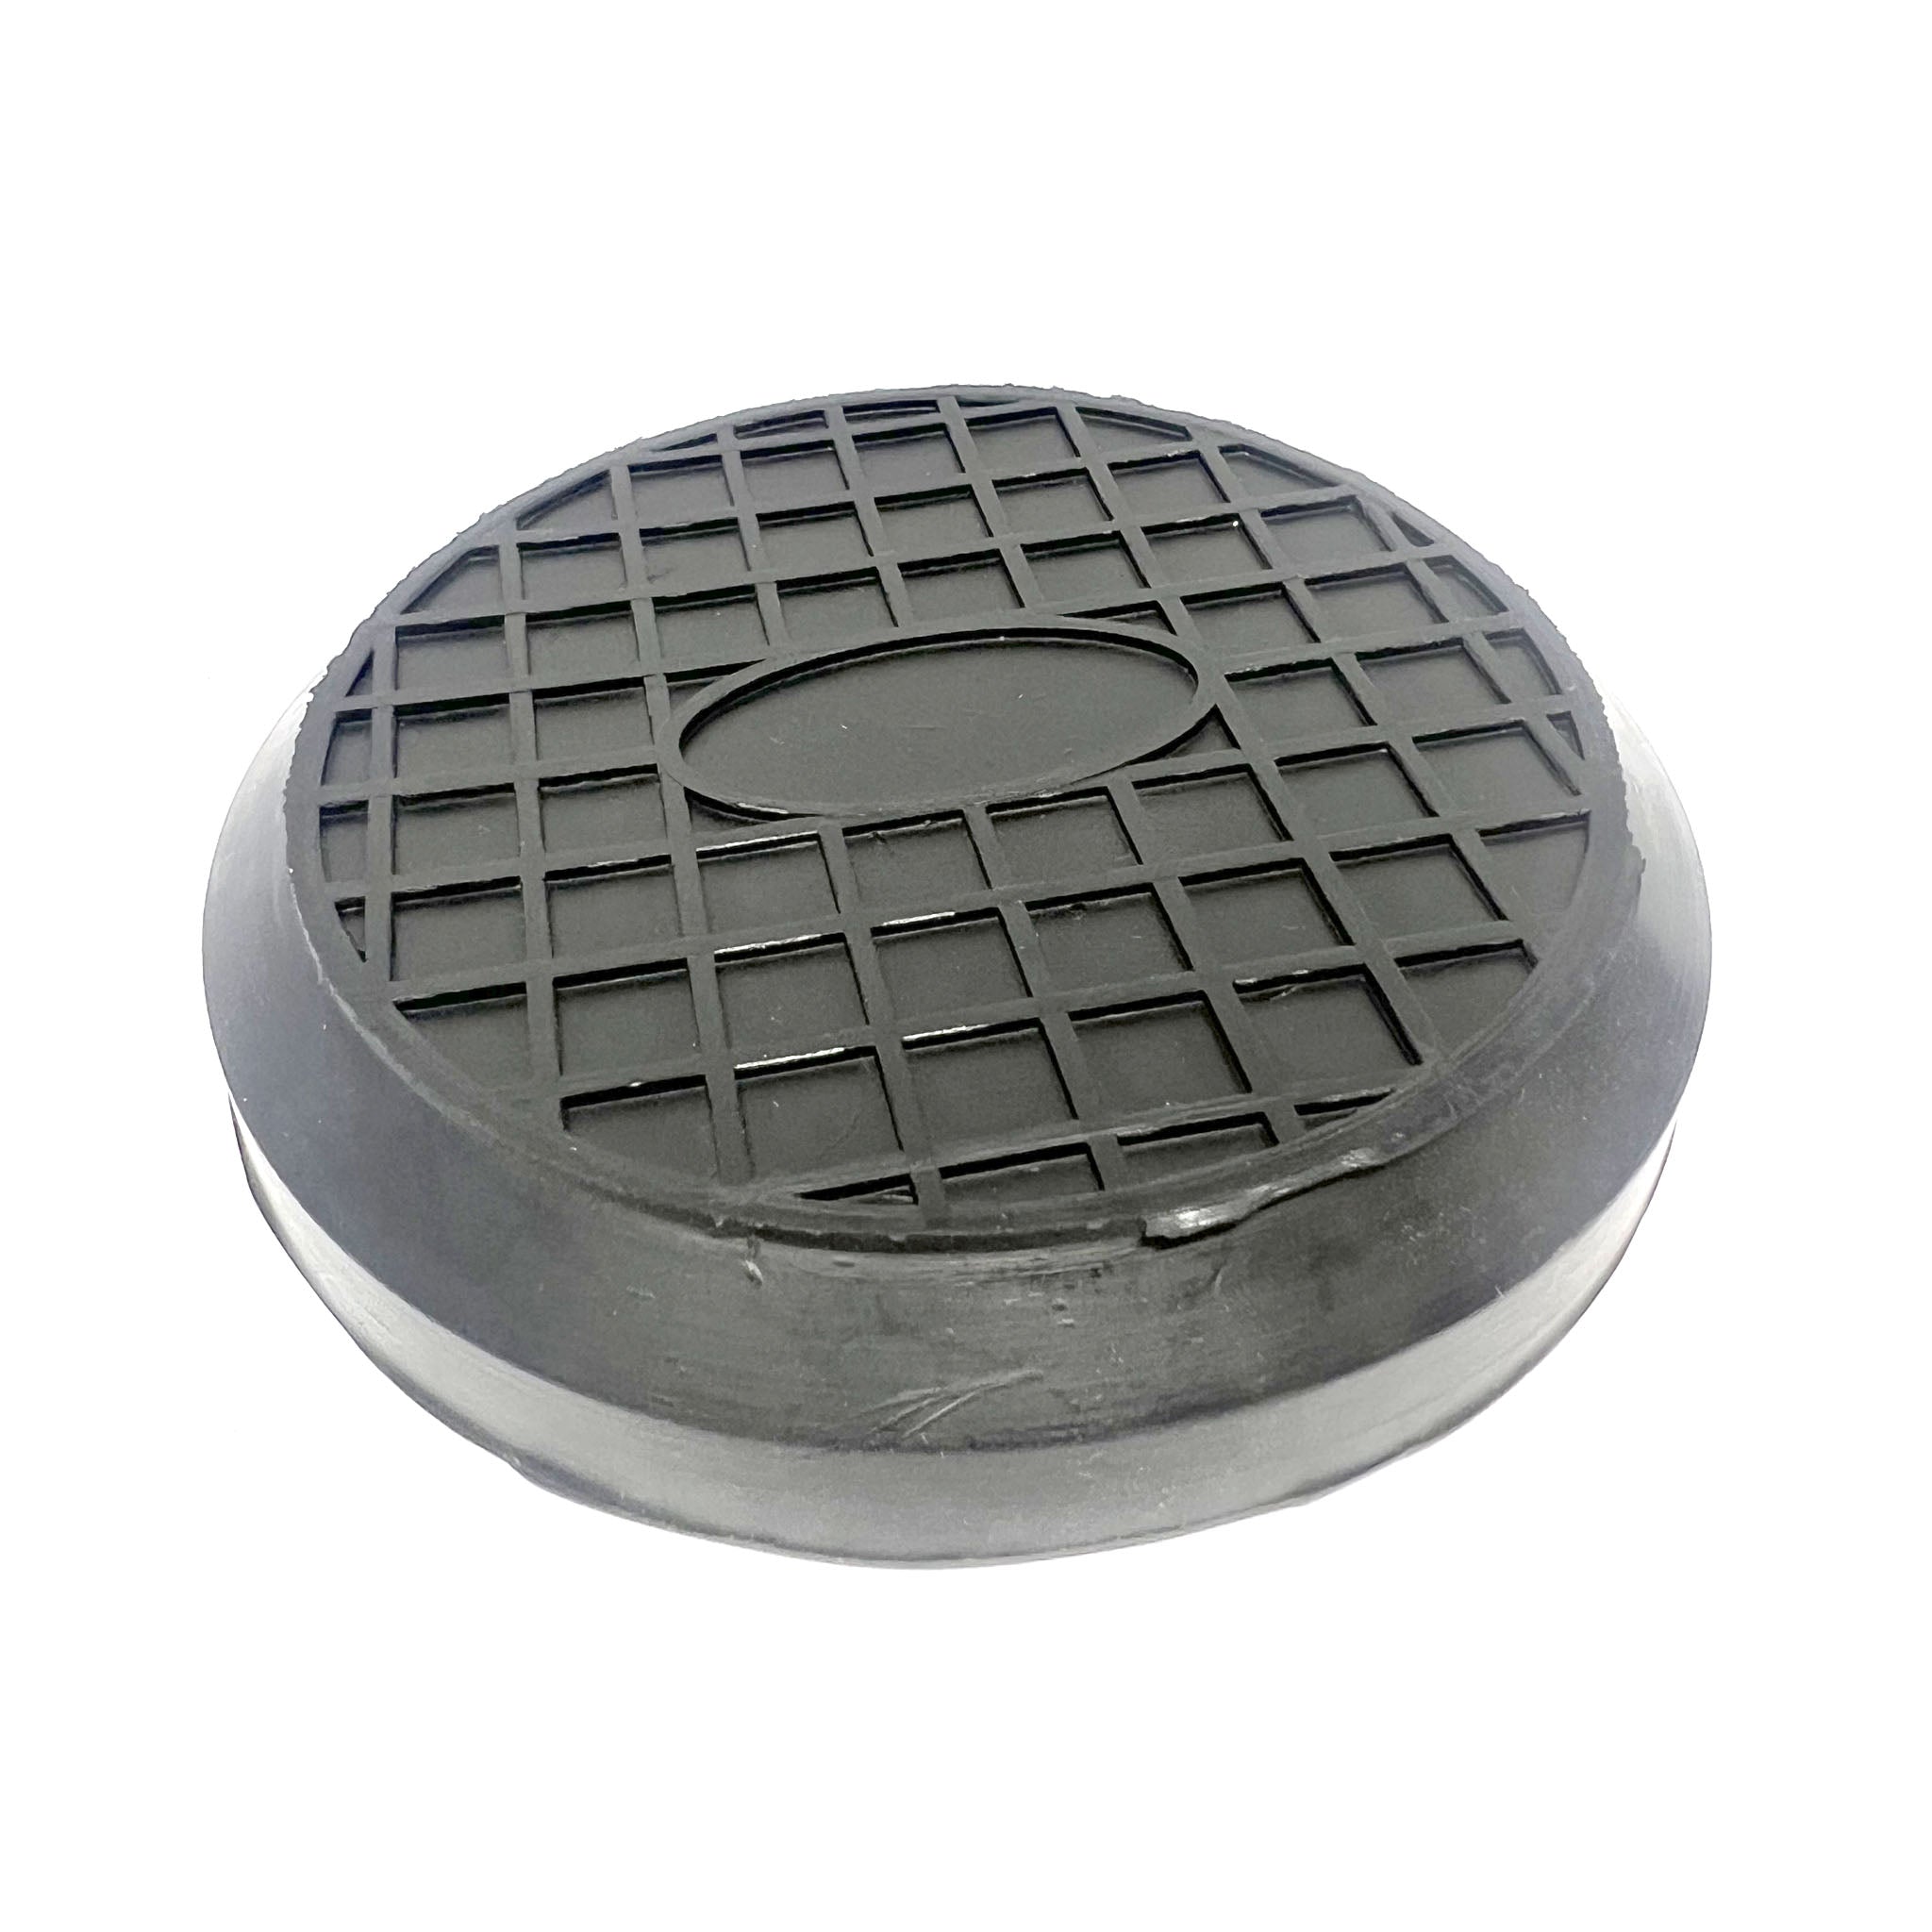 Round Slip-on Waffle Style W/Screws Rotary Rubber Pads 4PK